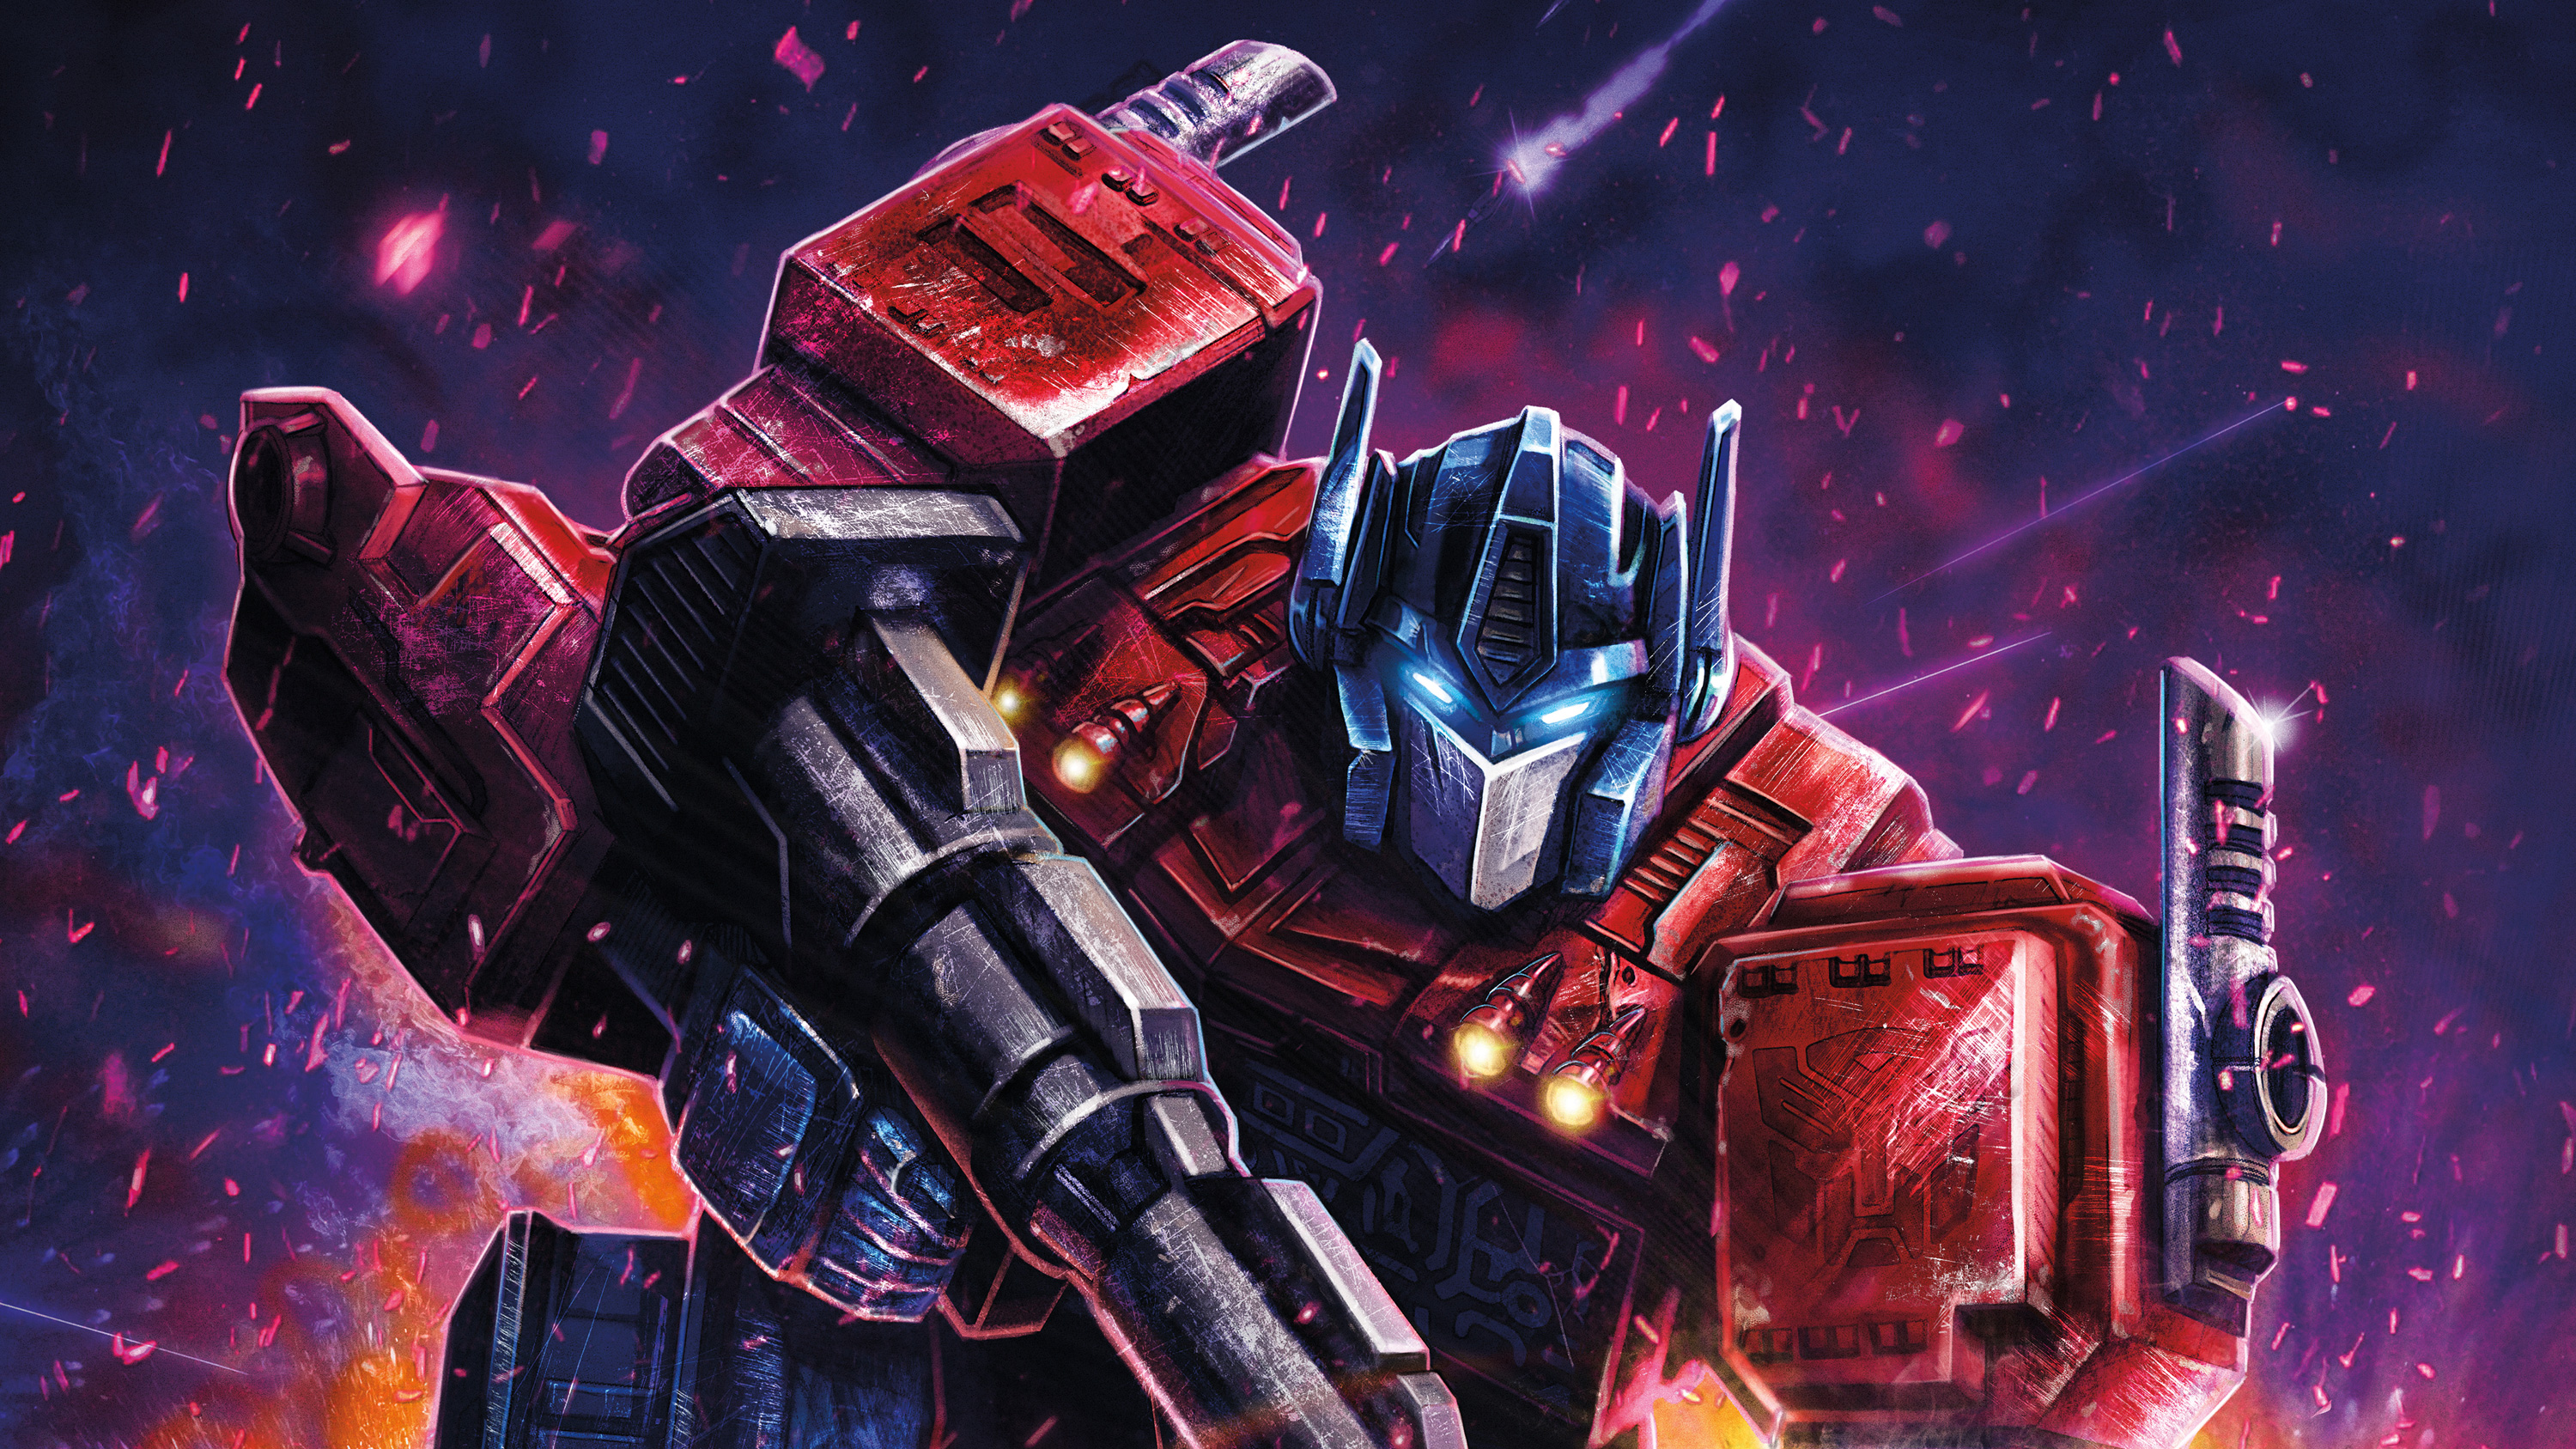 transformers wallpaper android,action adventure game,fictional character,transformers,robot,technology